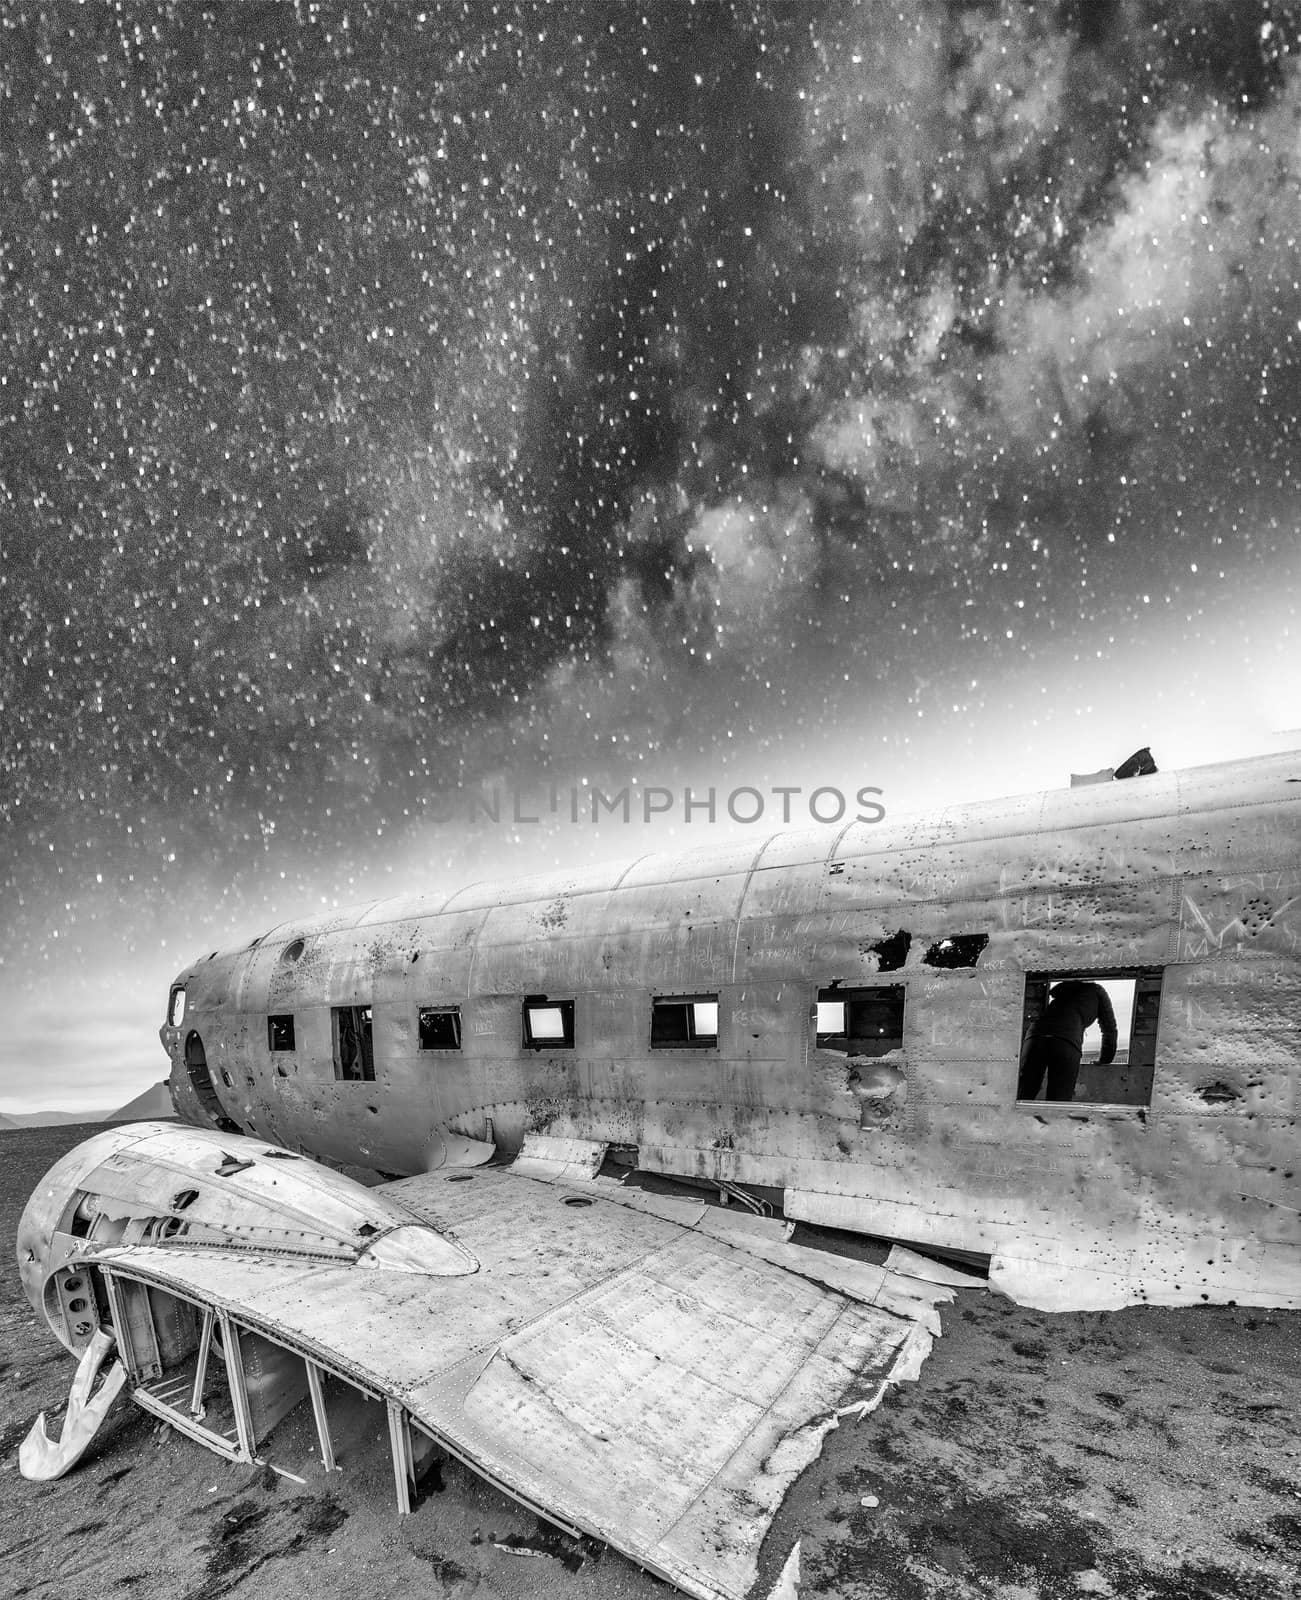 Abandoned wreckage of old aircraft on a beach under a starry nig by jovannig